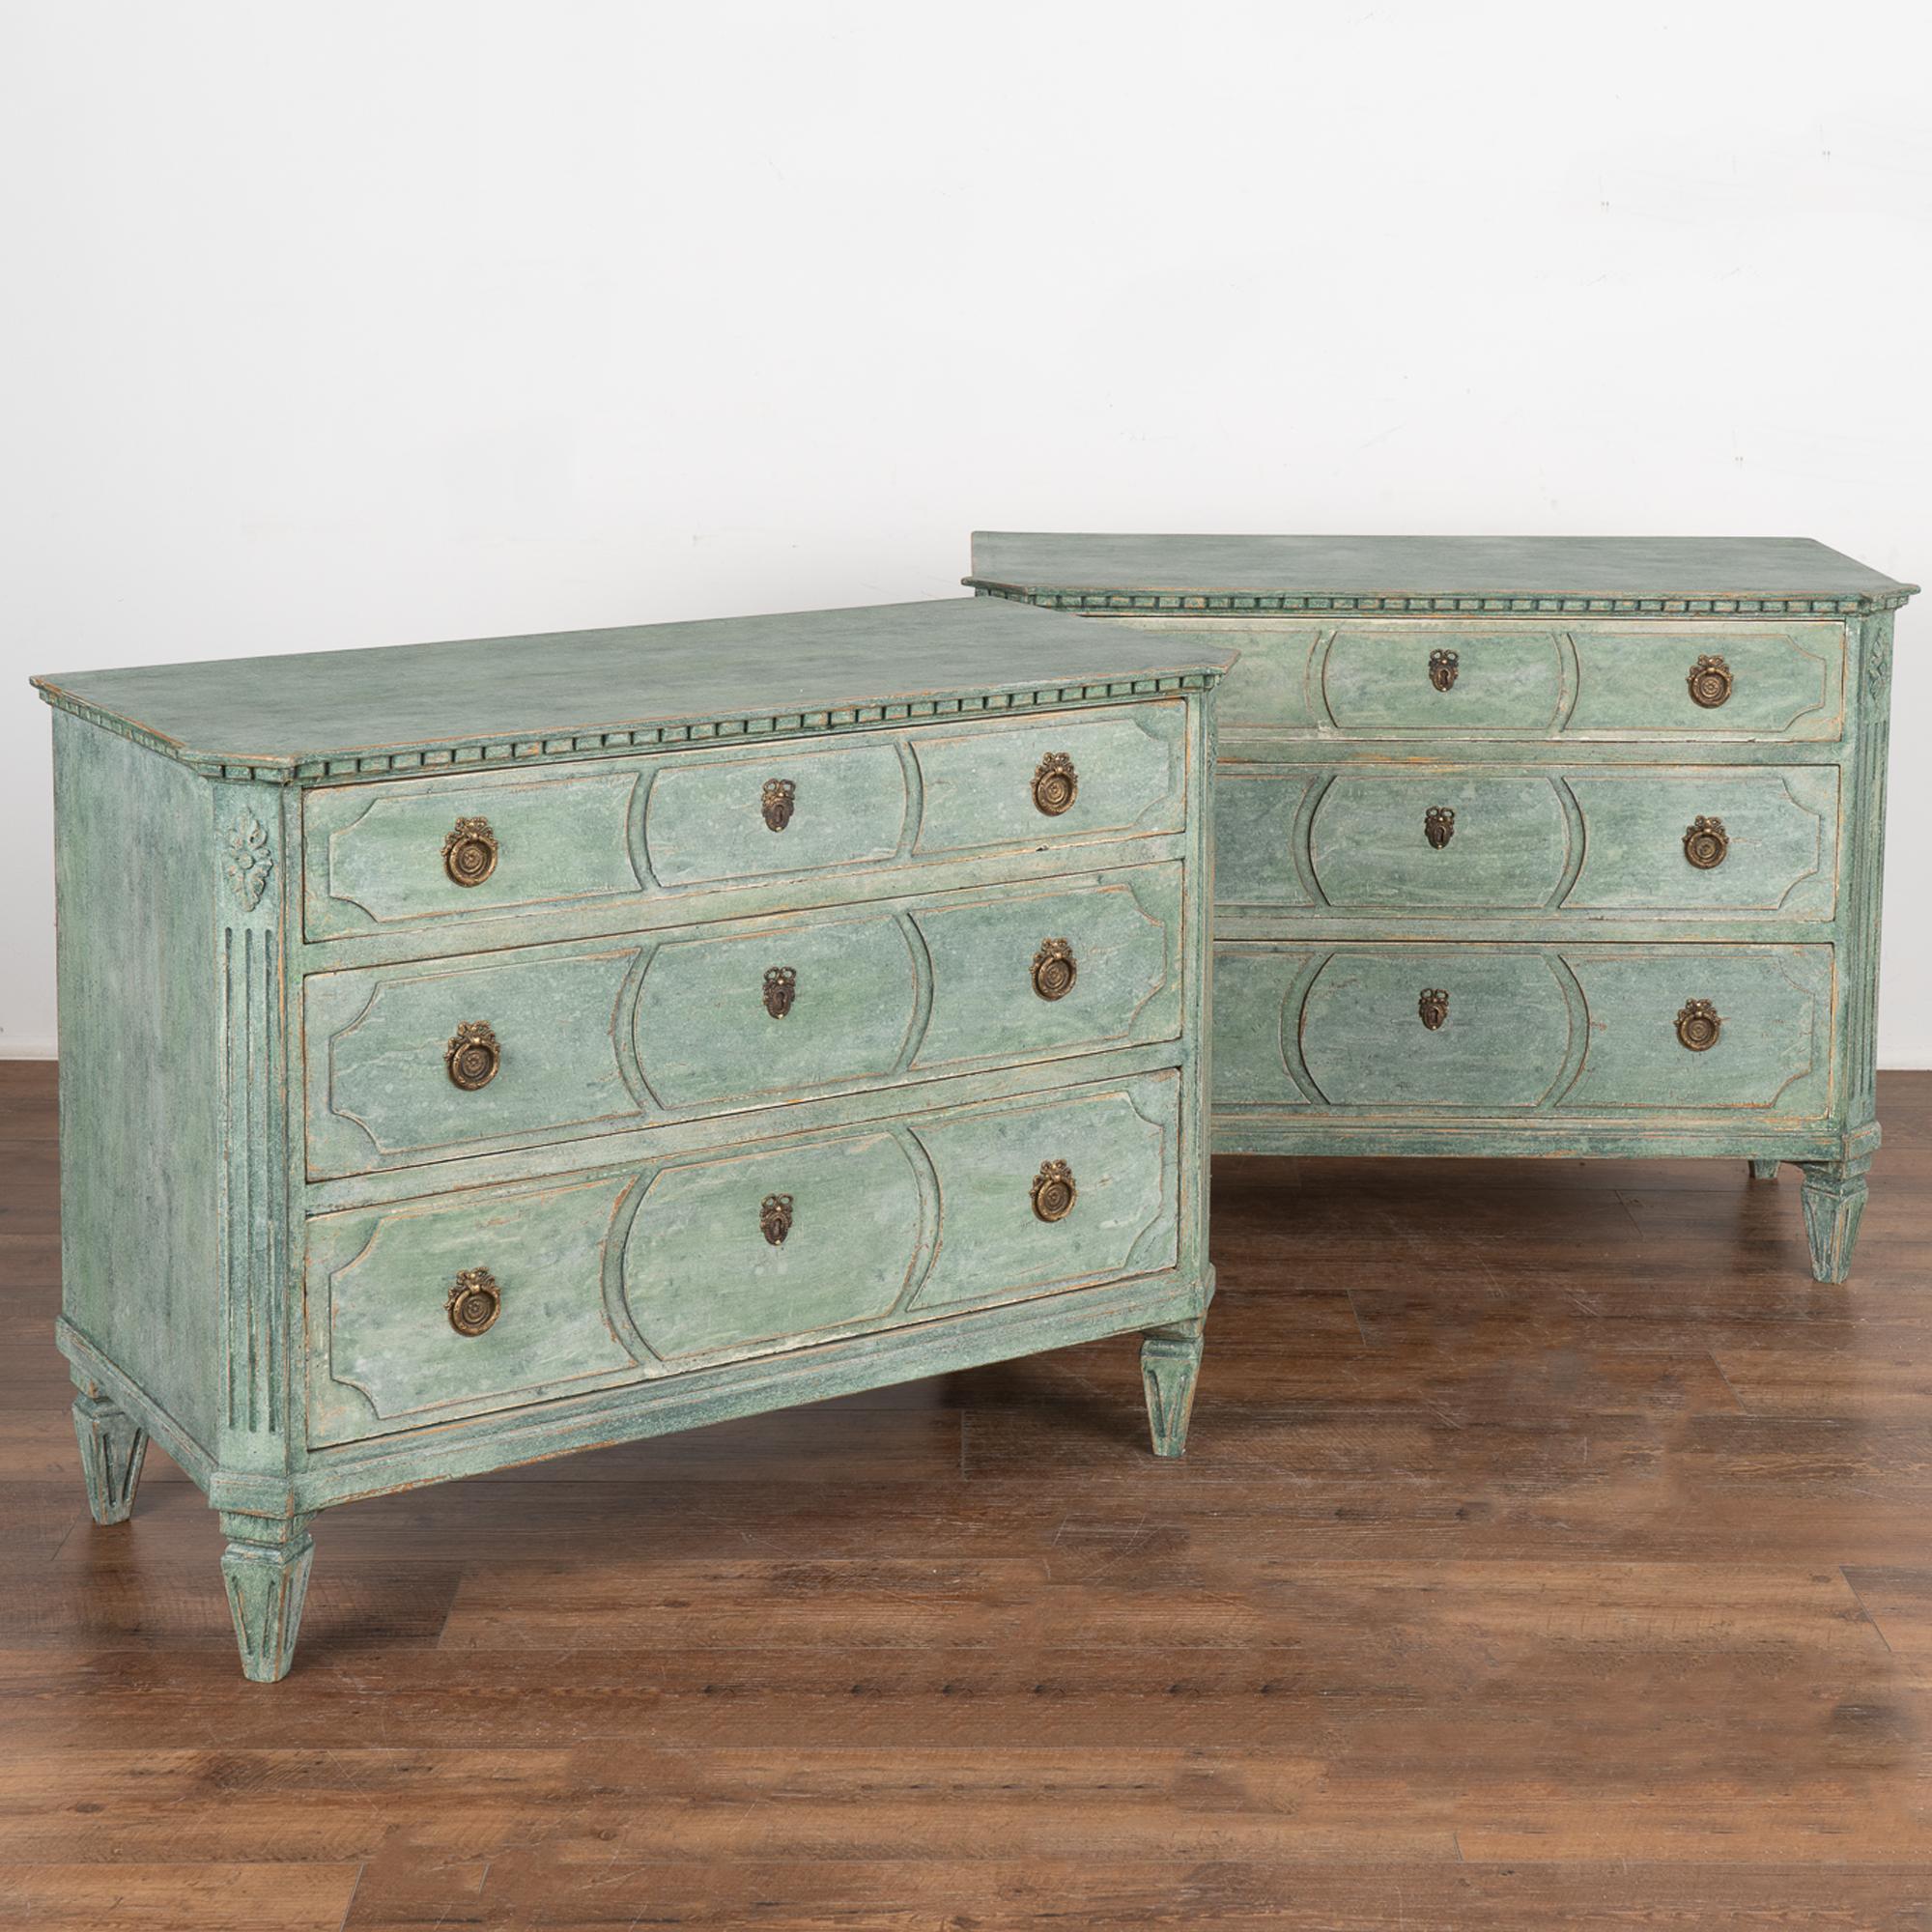 A pair of elegant Gustavian pine chests of three drawers painted in soft shades of green.
Canted fluted side posts with upper carved floral medallion, dentil molding, raised on four tapered fluted feet.
The decorative raised panels on each drawer